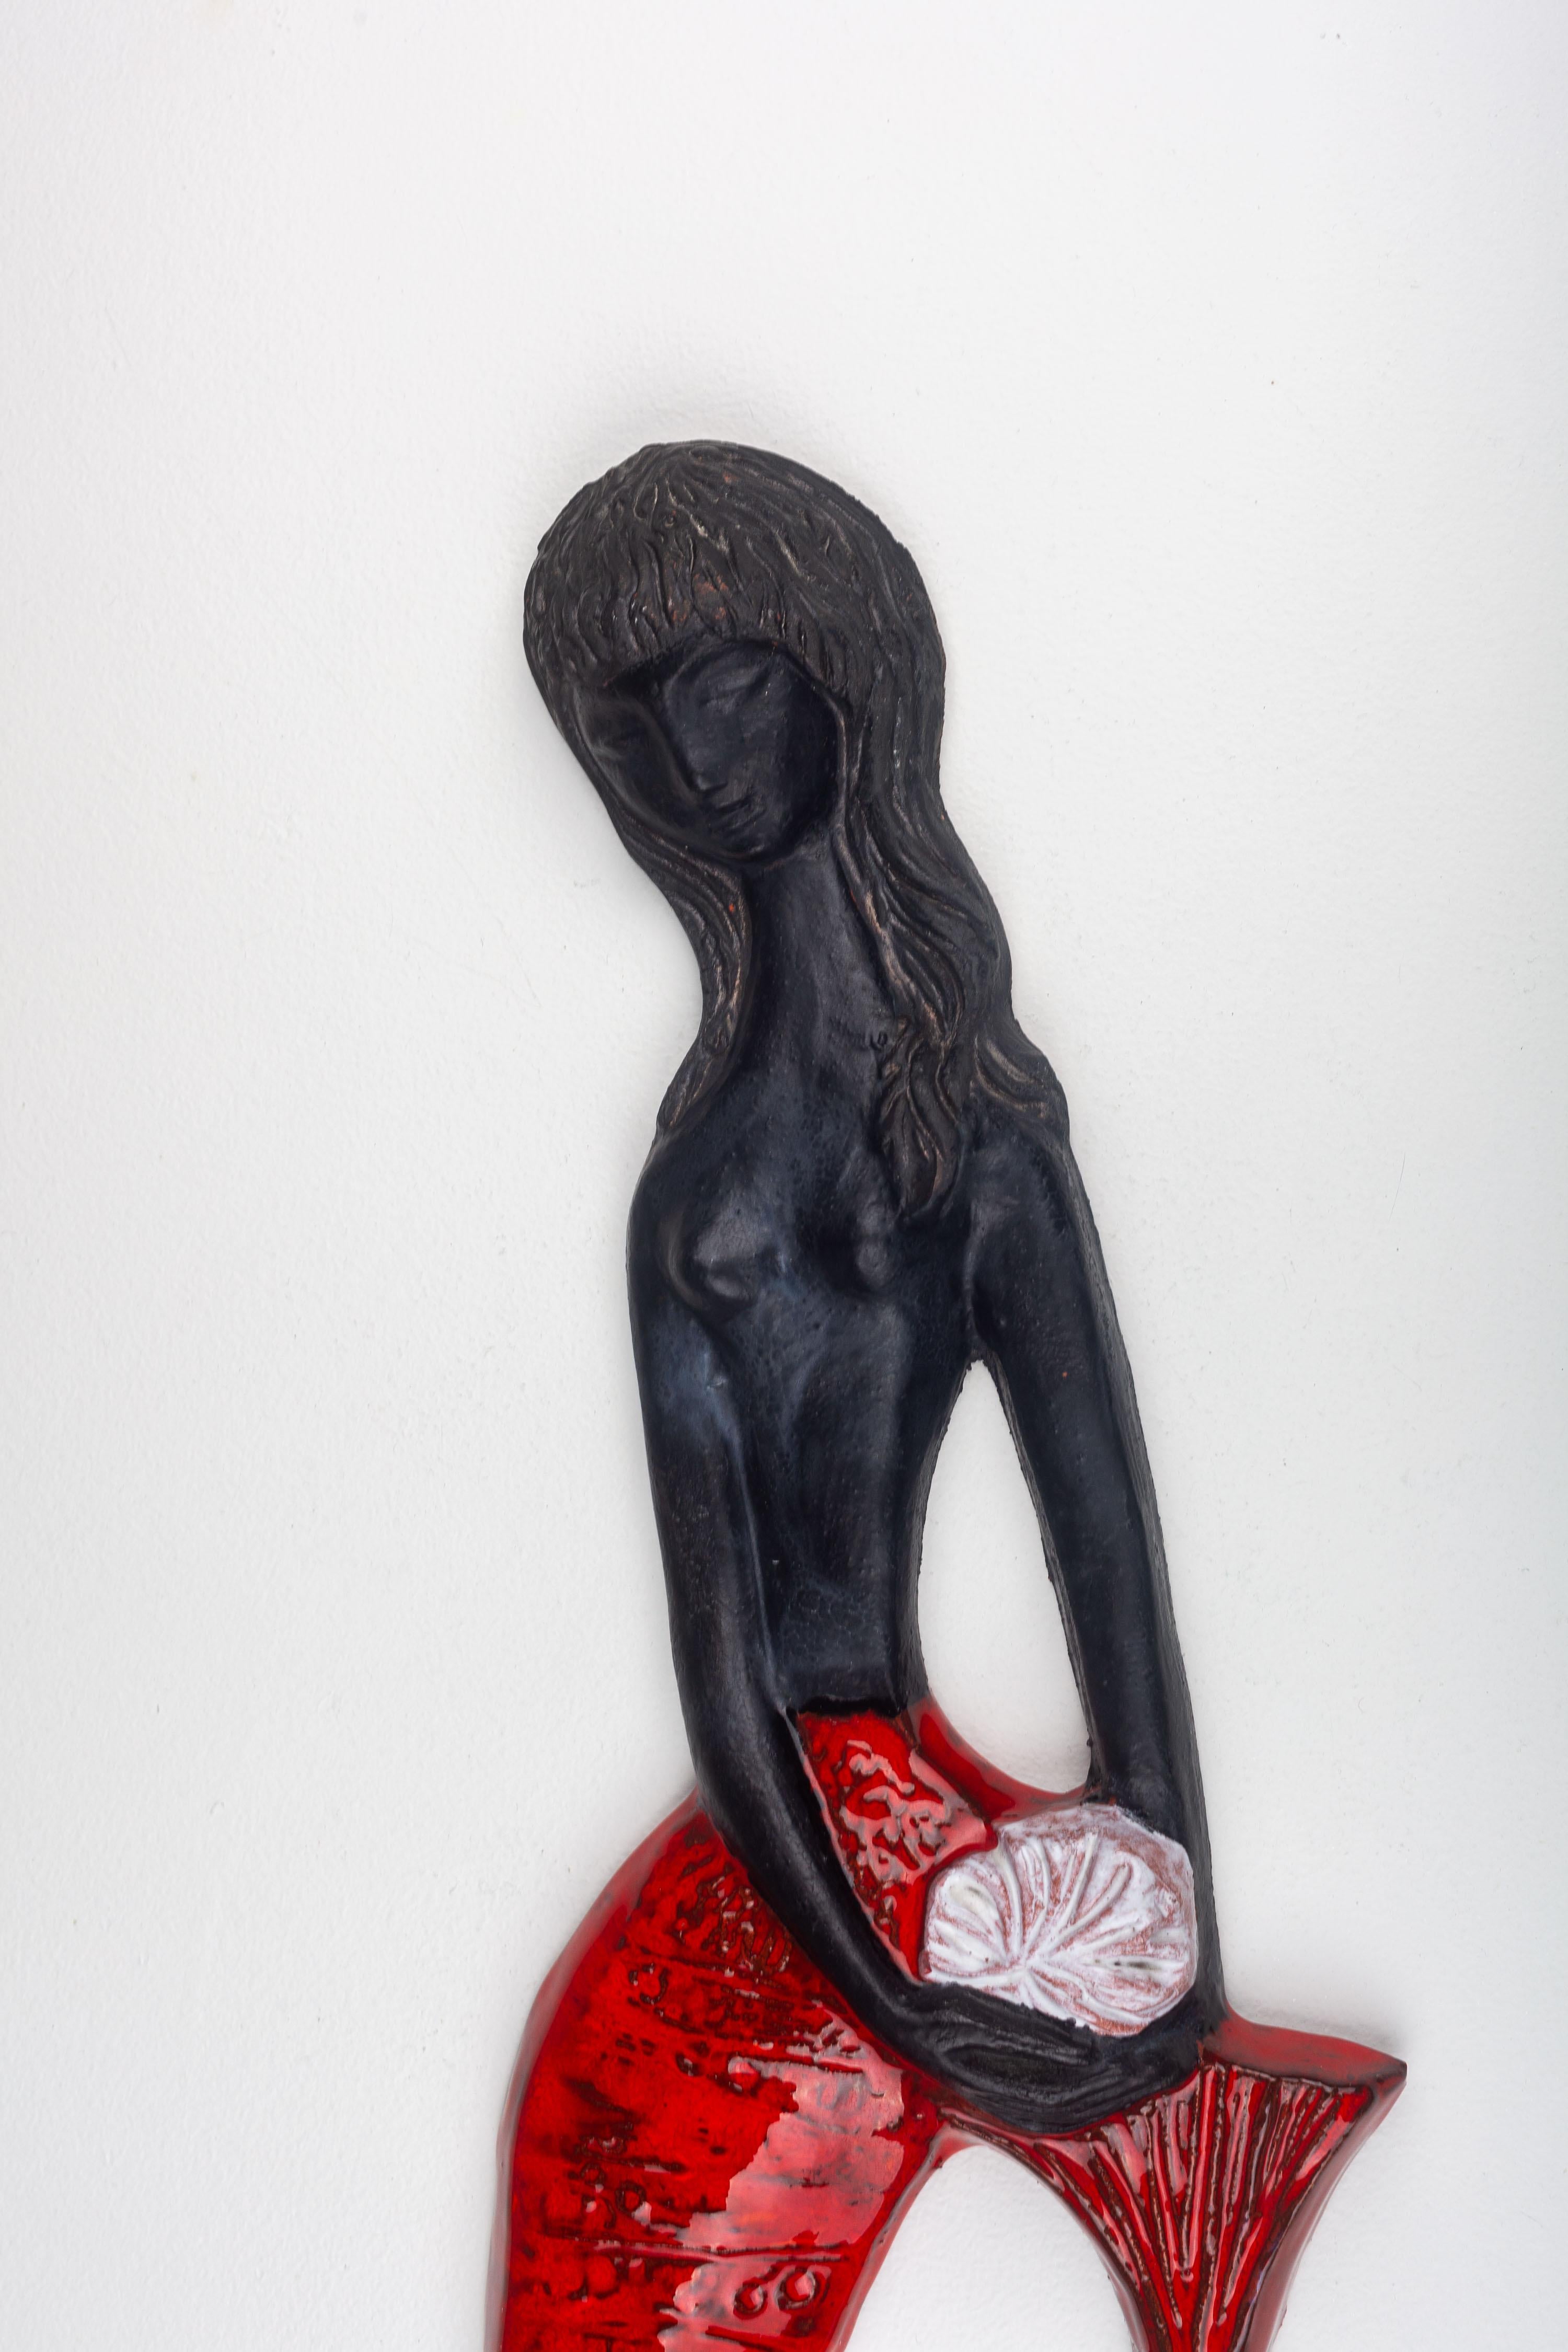 Mid-20th Century Midcentury European Mermaid Ceramic Wall Art, Black and Red, 1960s For Sale